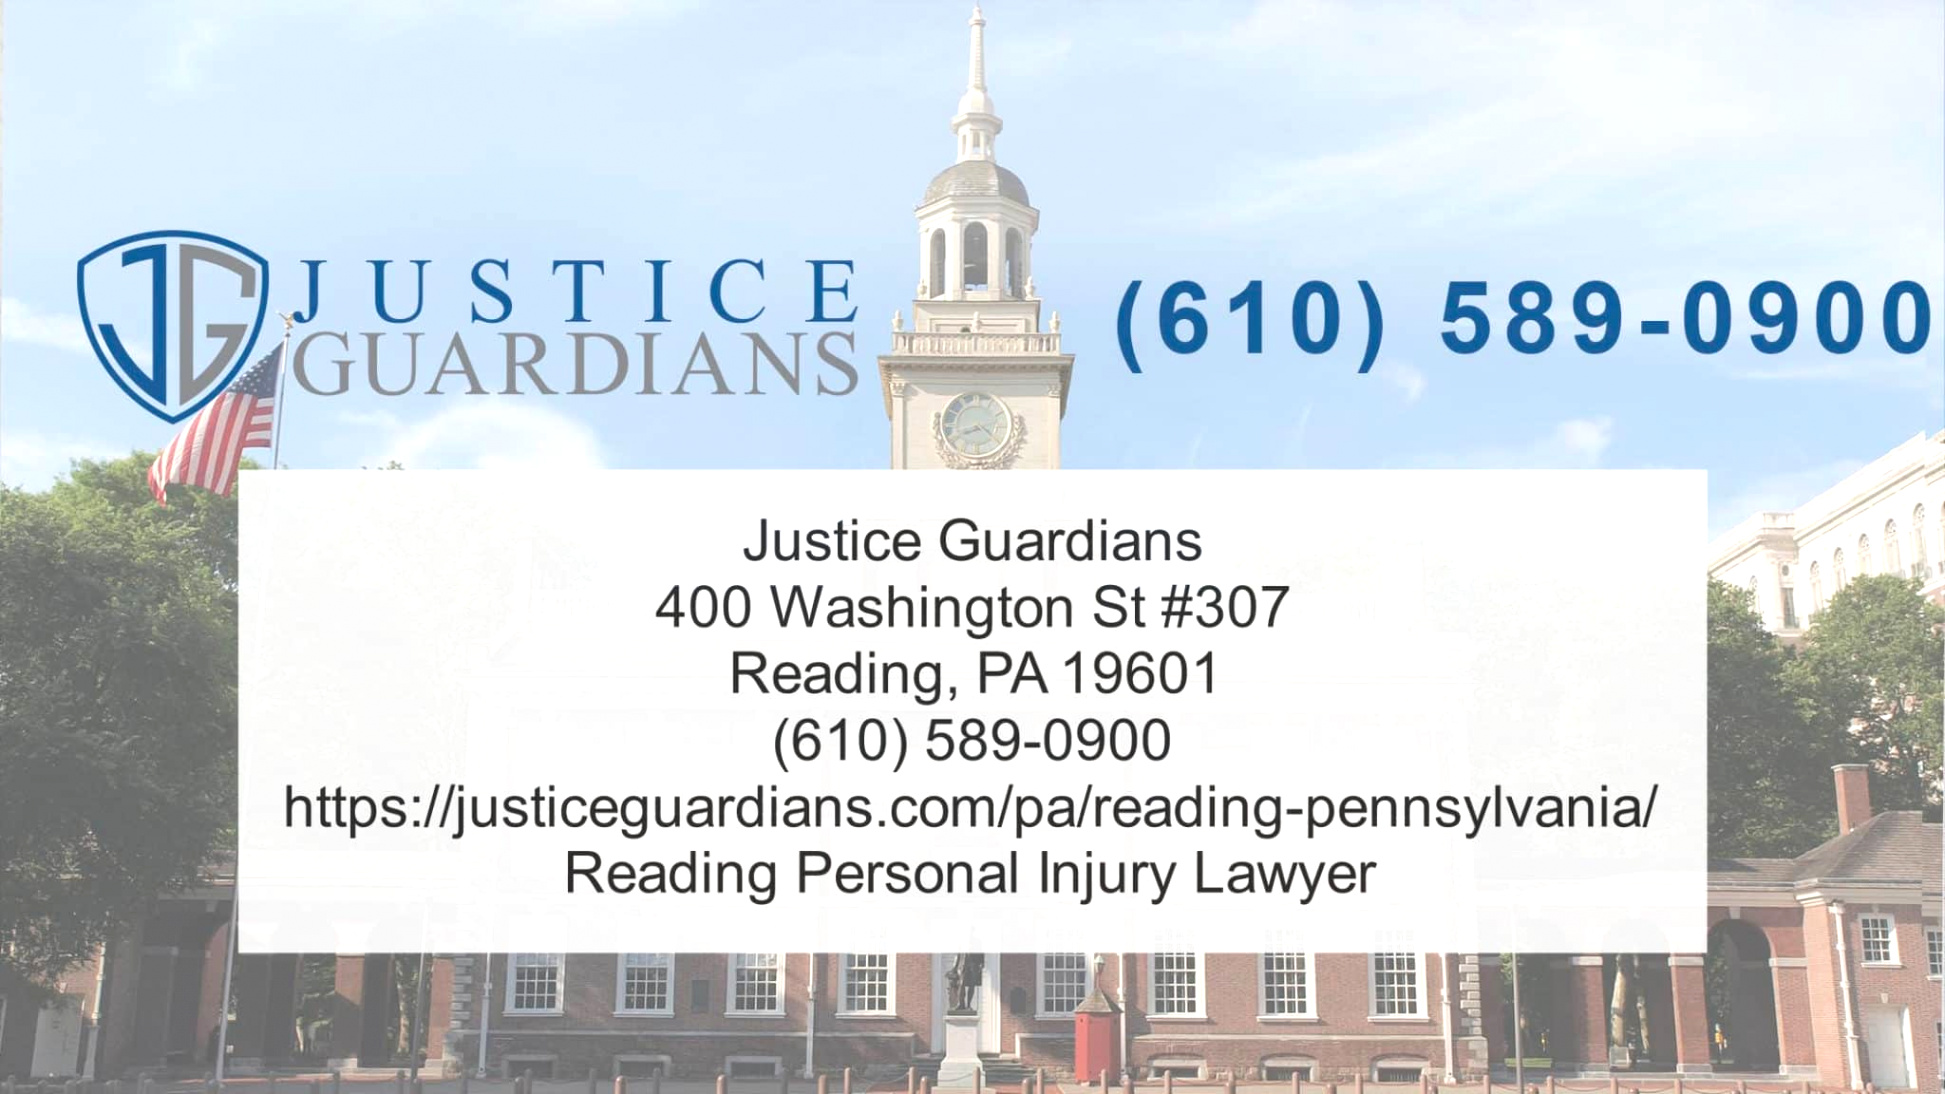 Car Accident Lawyer In Lawrence Sd Dans Reading, Pennsylvania - Accident attorneys Justice Guardians Law ...